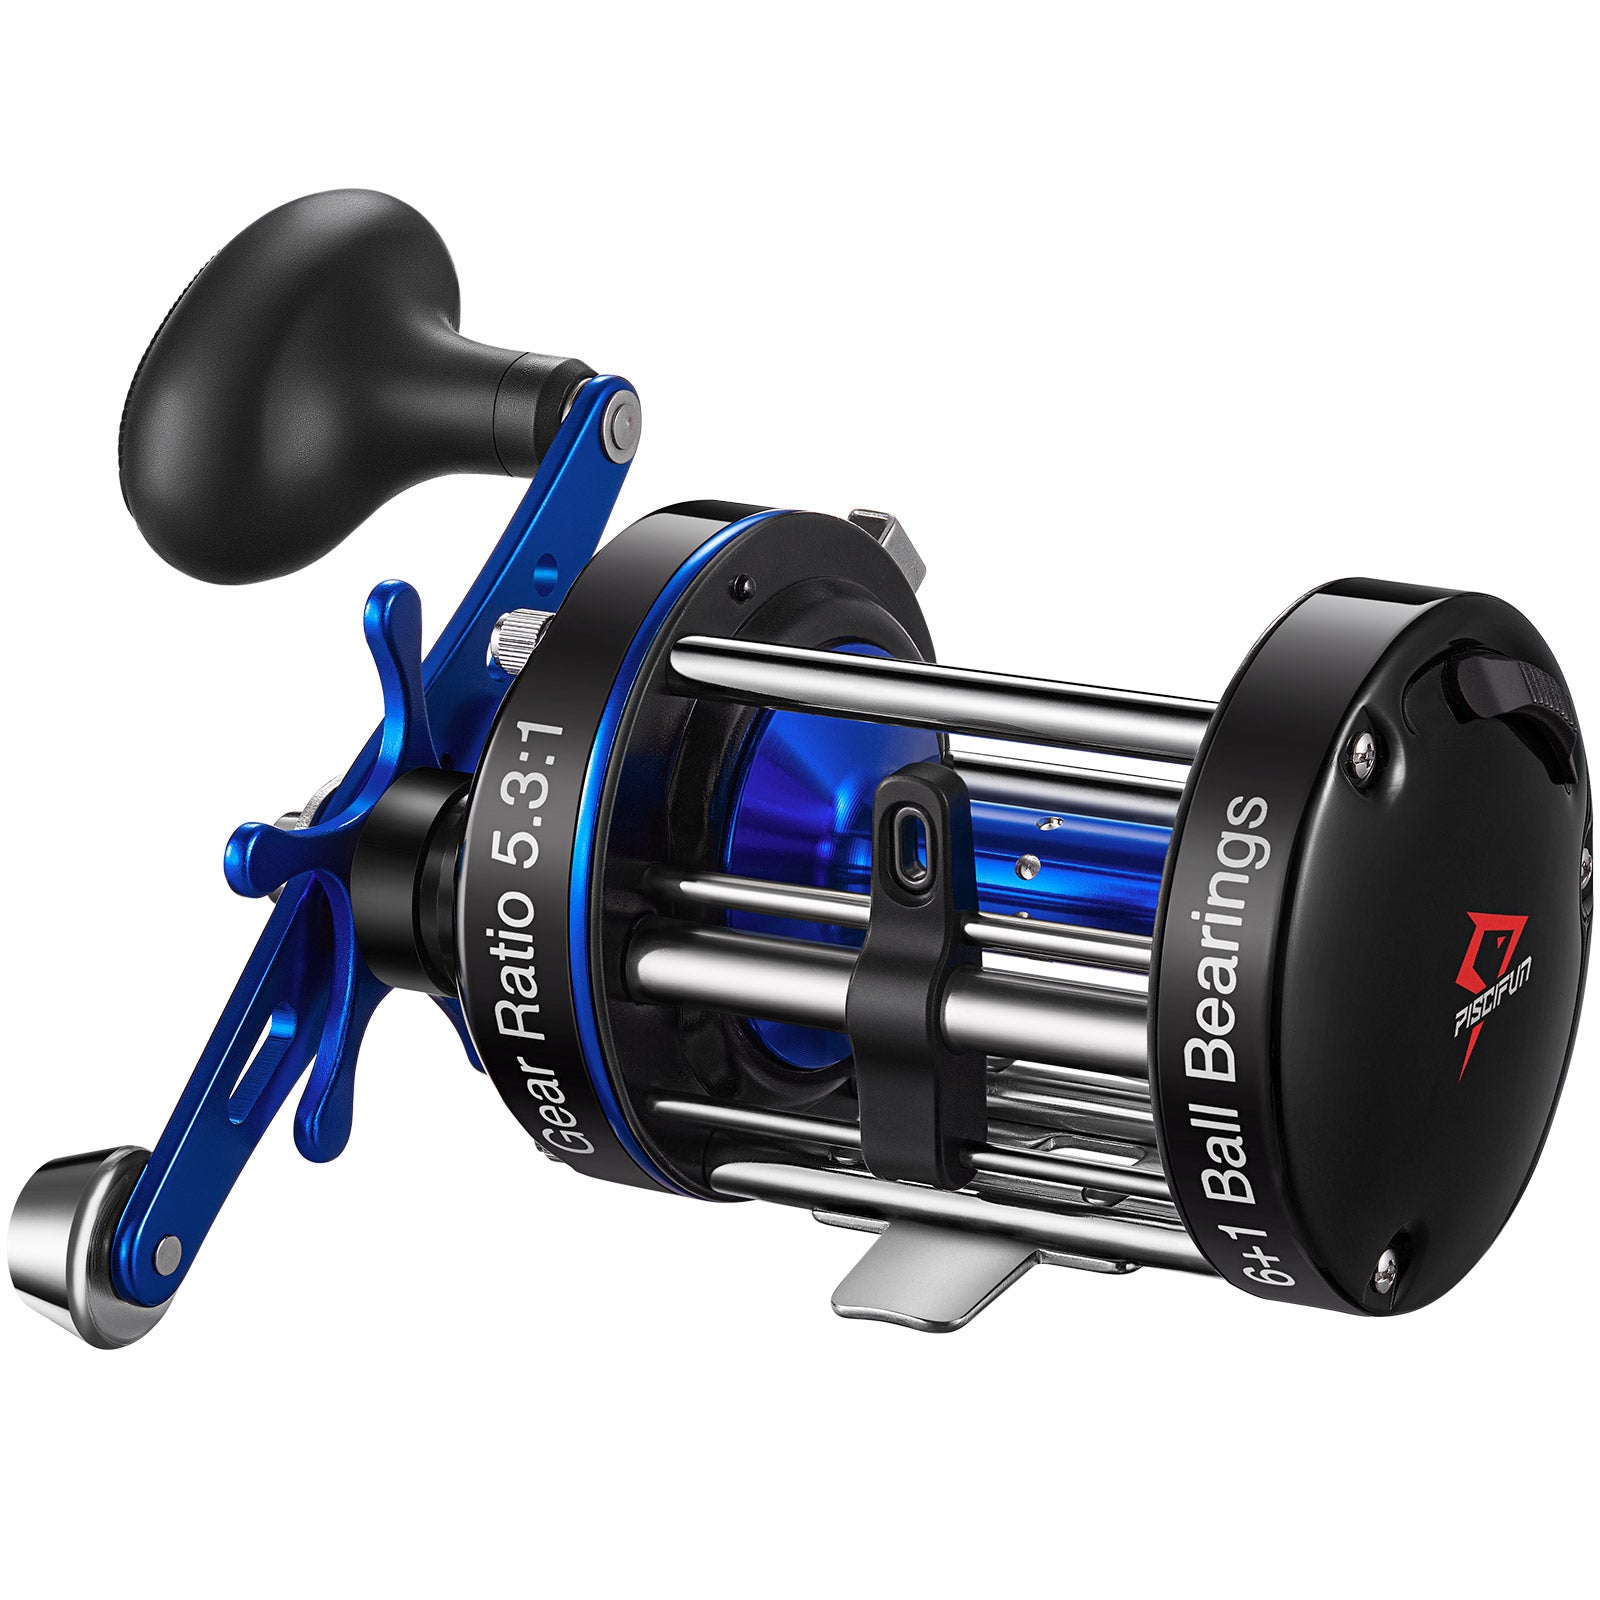 Chaos XS Round Saltwater Baitcasting Reel, 6000 / RIGHT HAND / Black